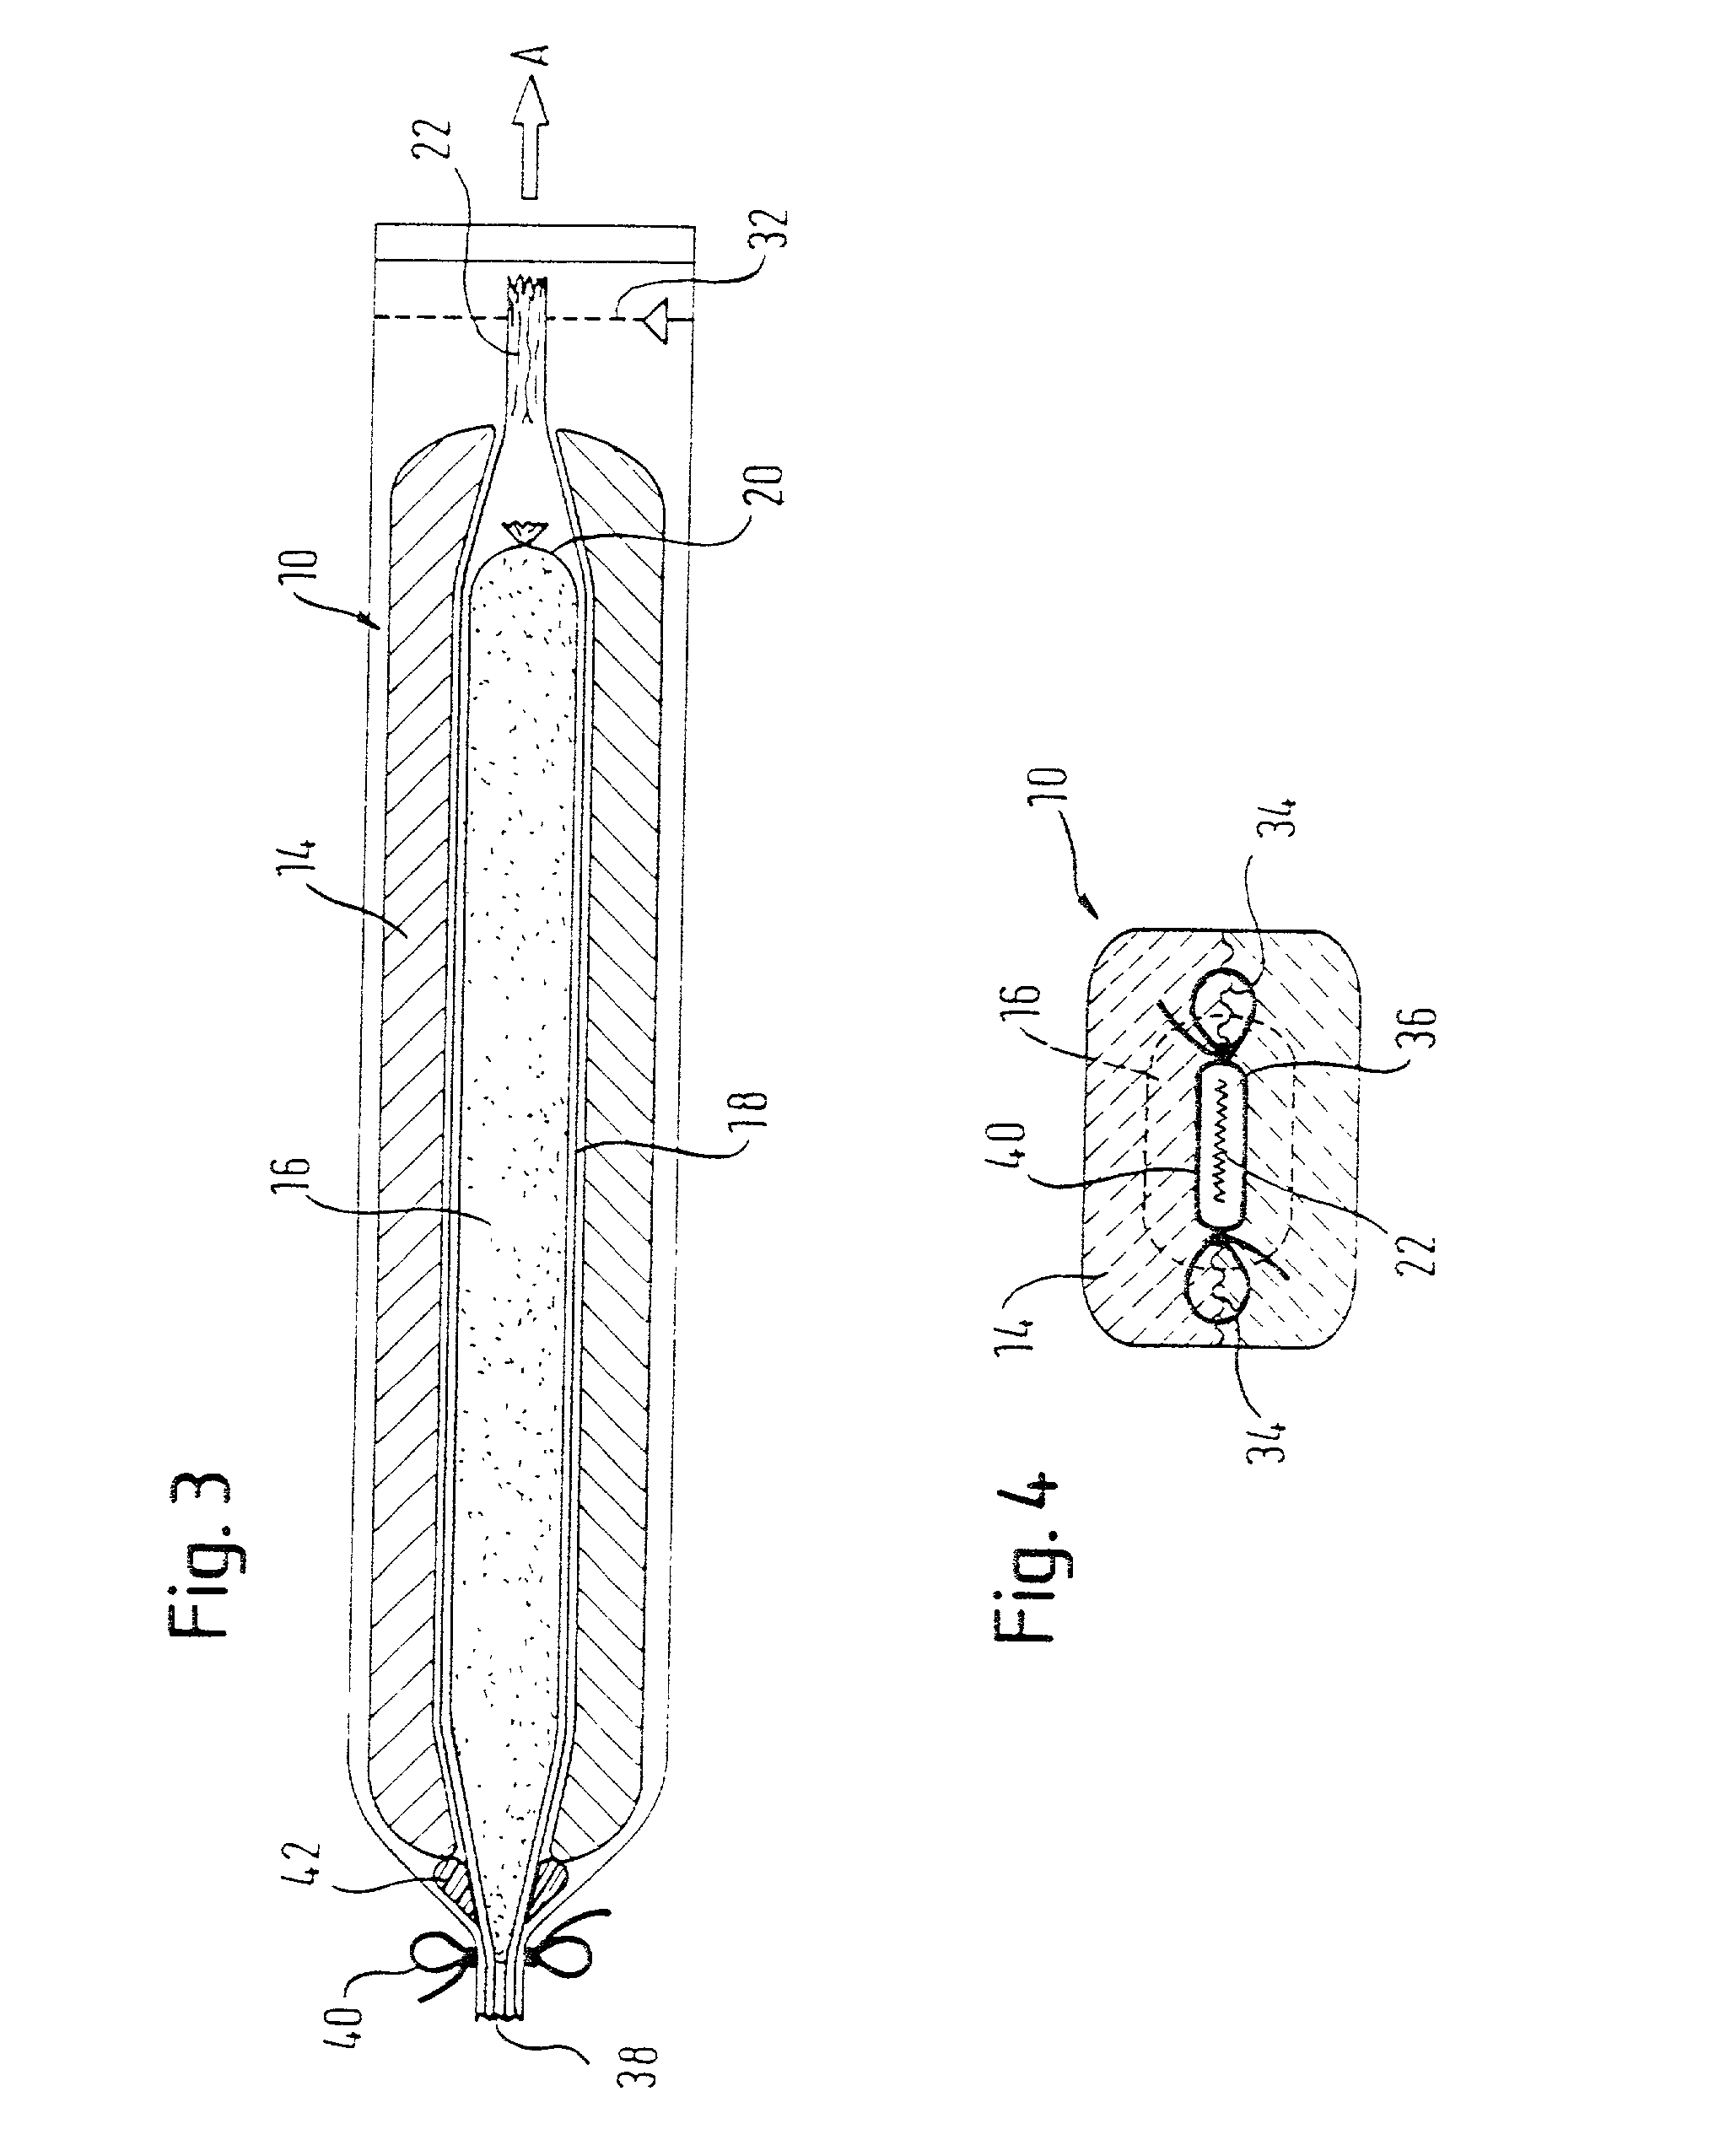 Food product and method of manufacturing a food product